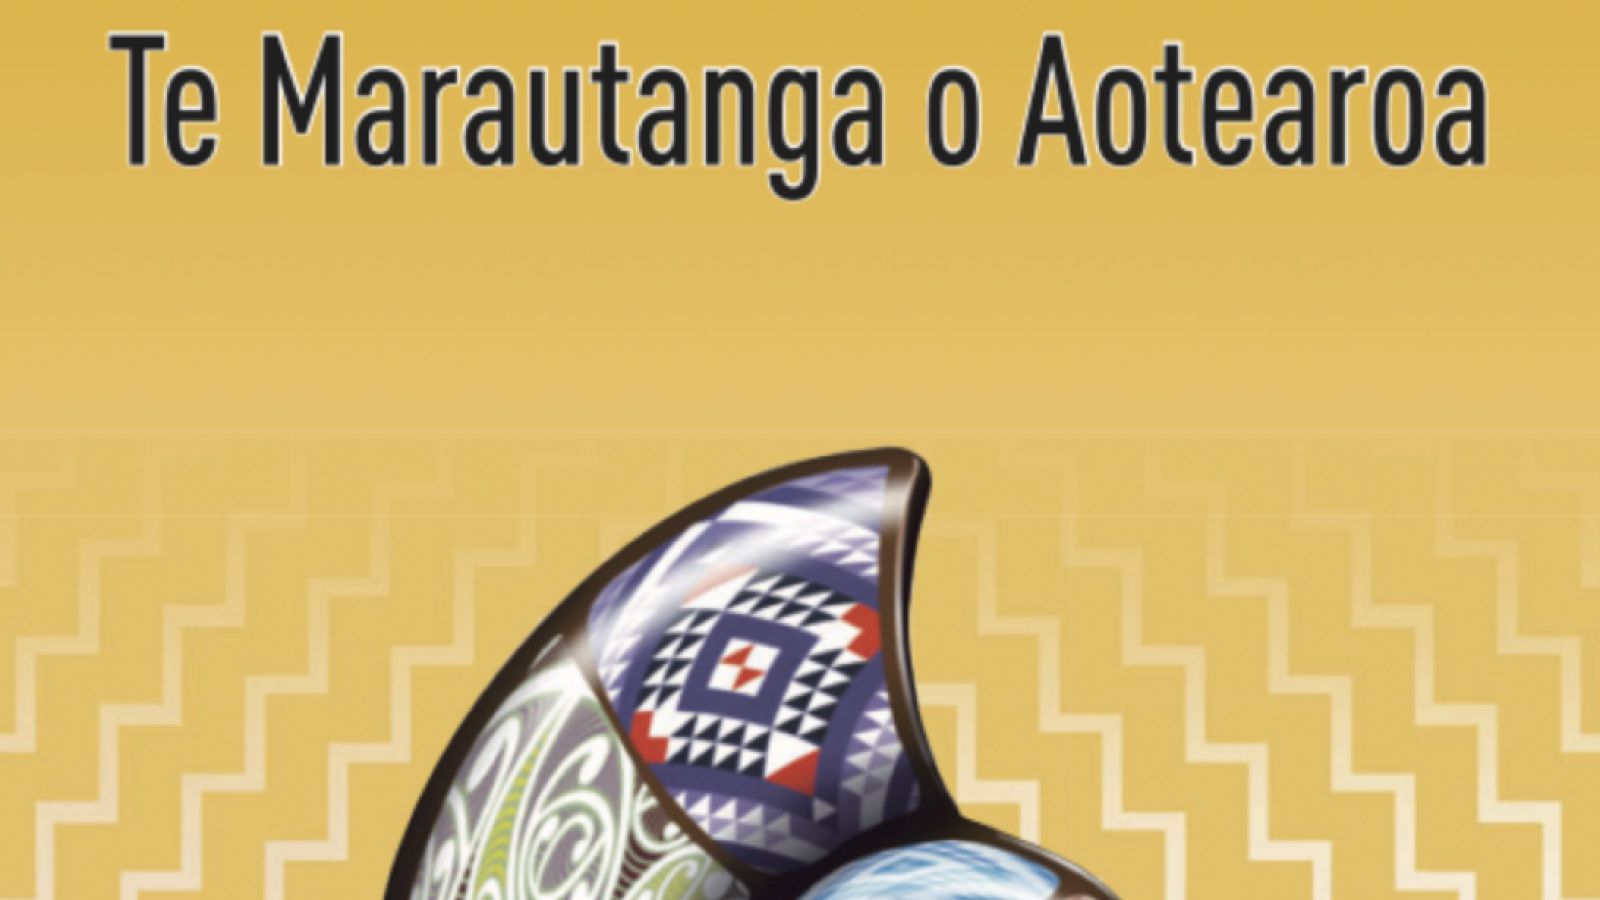 Te Marautanga o Aotearoa e-book cover. The cover is yellow, with faded yellow zig zags across the page, and a large conch shell decorated with colourful Māori prints.